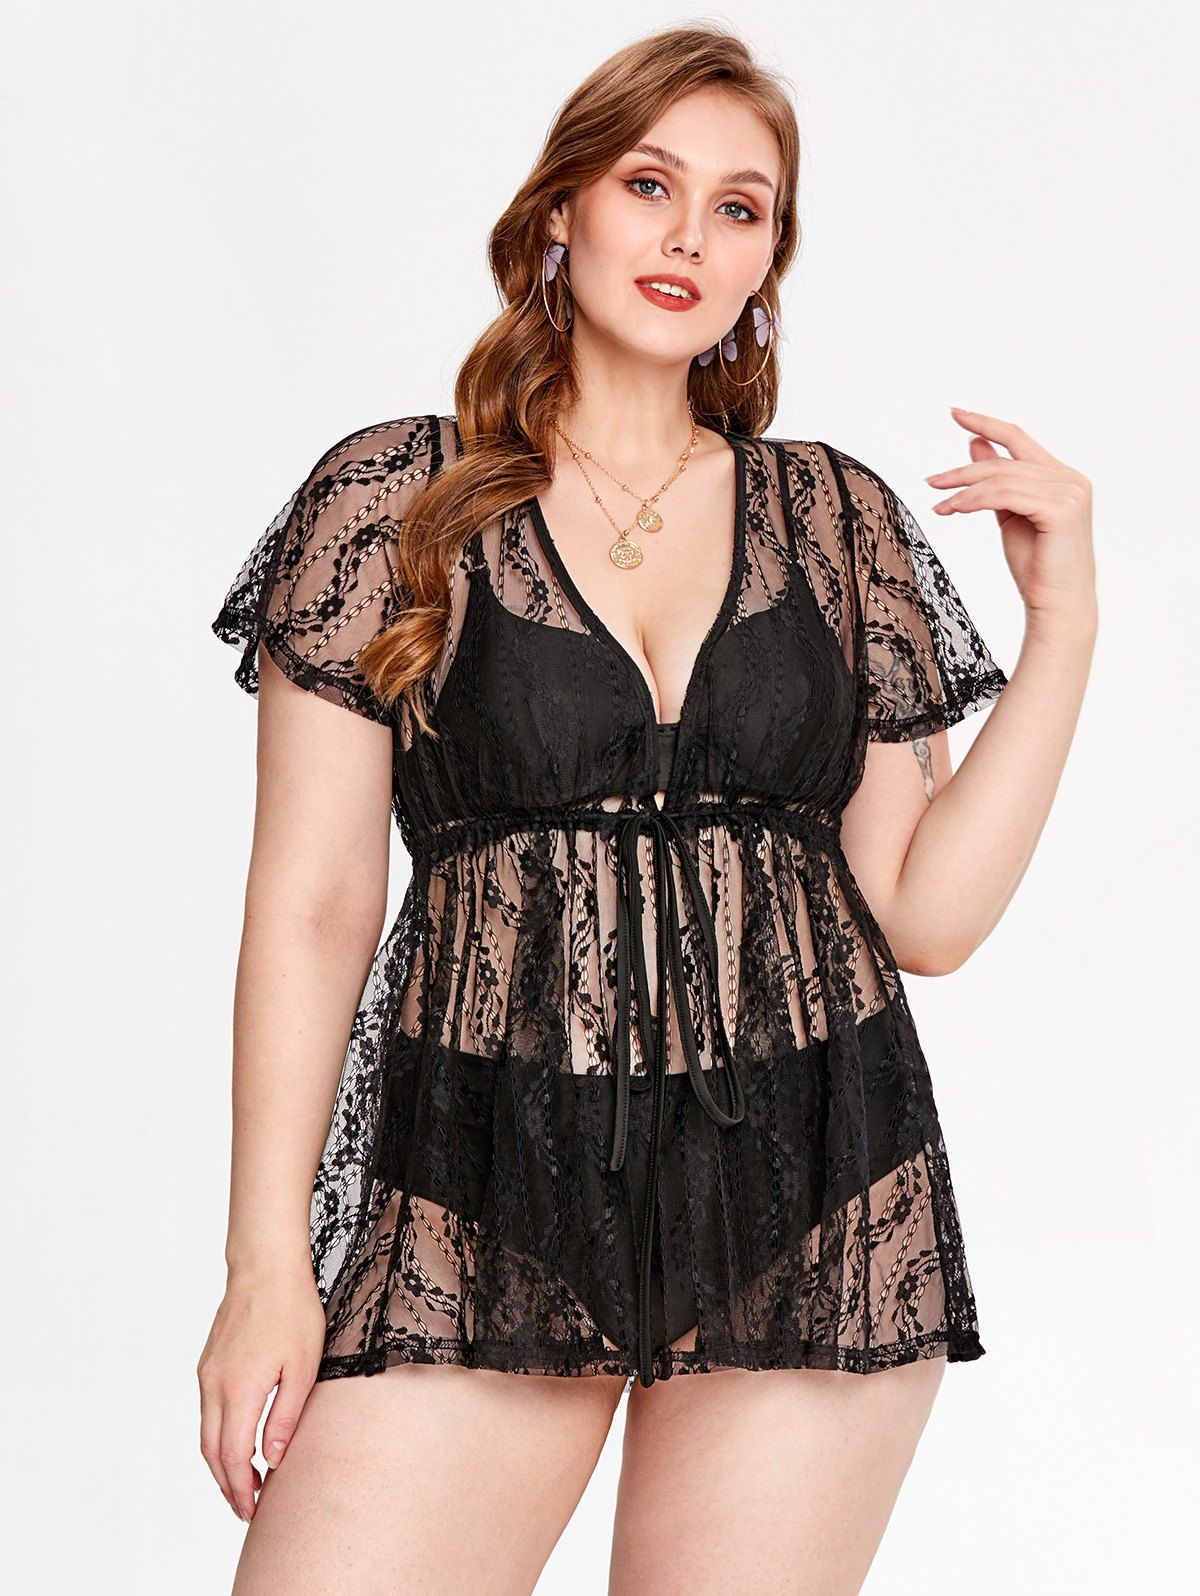 Plus Size Tie Sheer Lace Plunging Cover Up - BLACK 5X